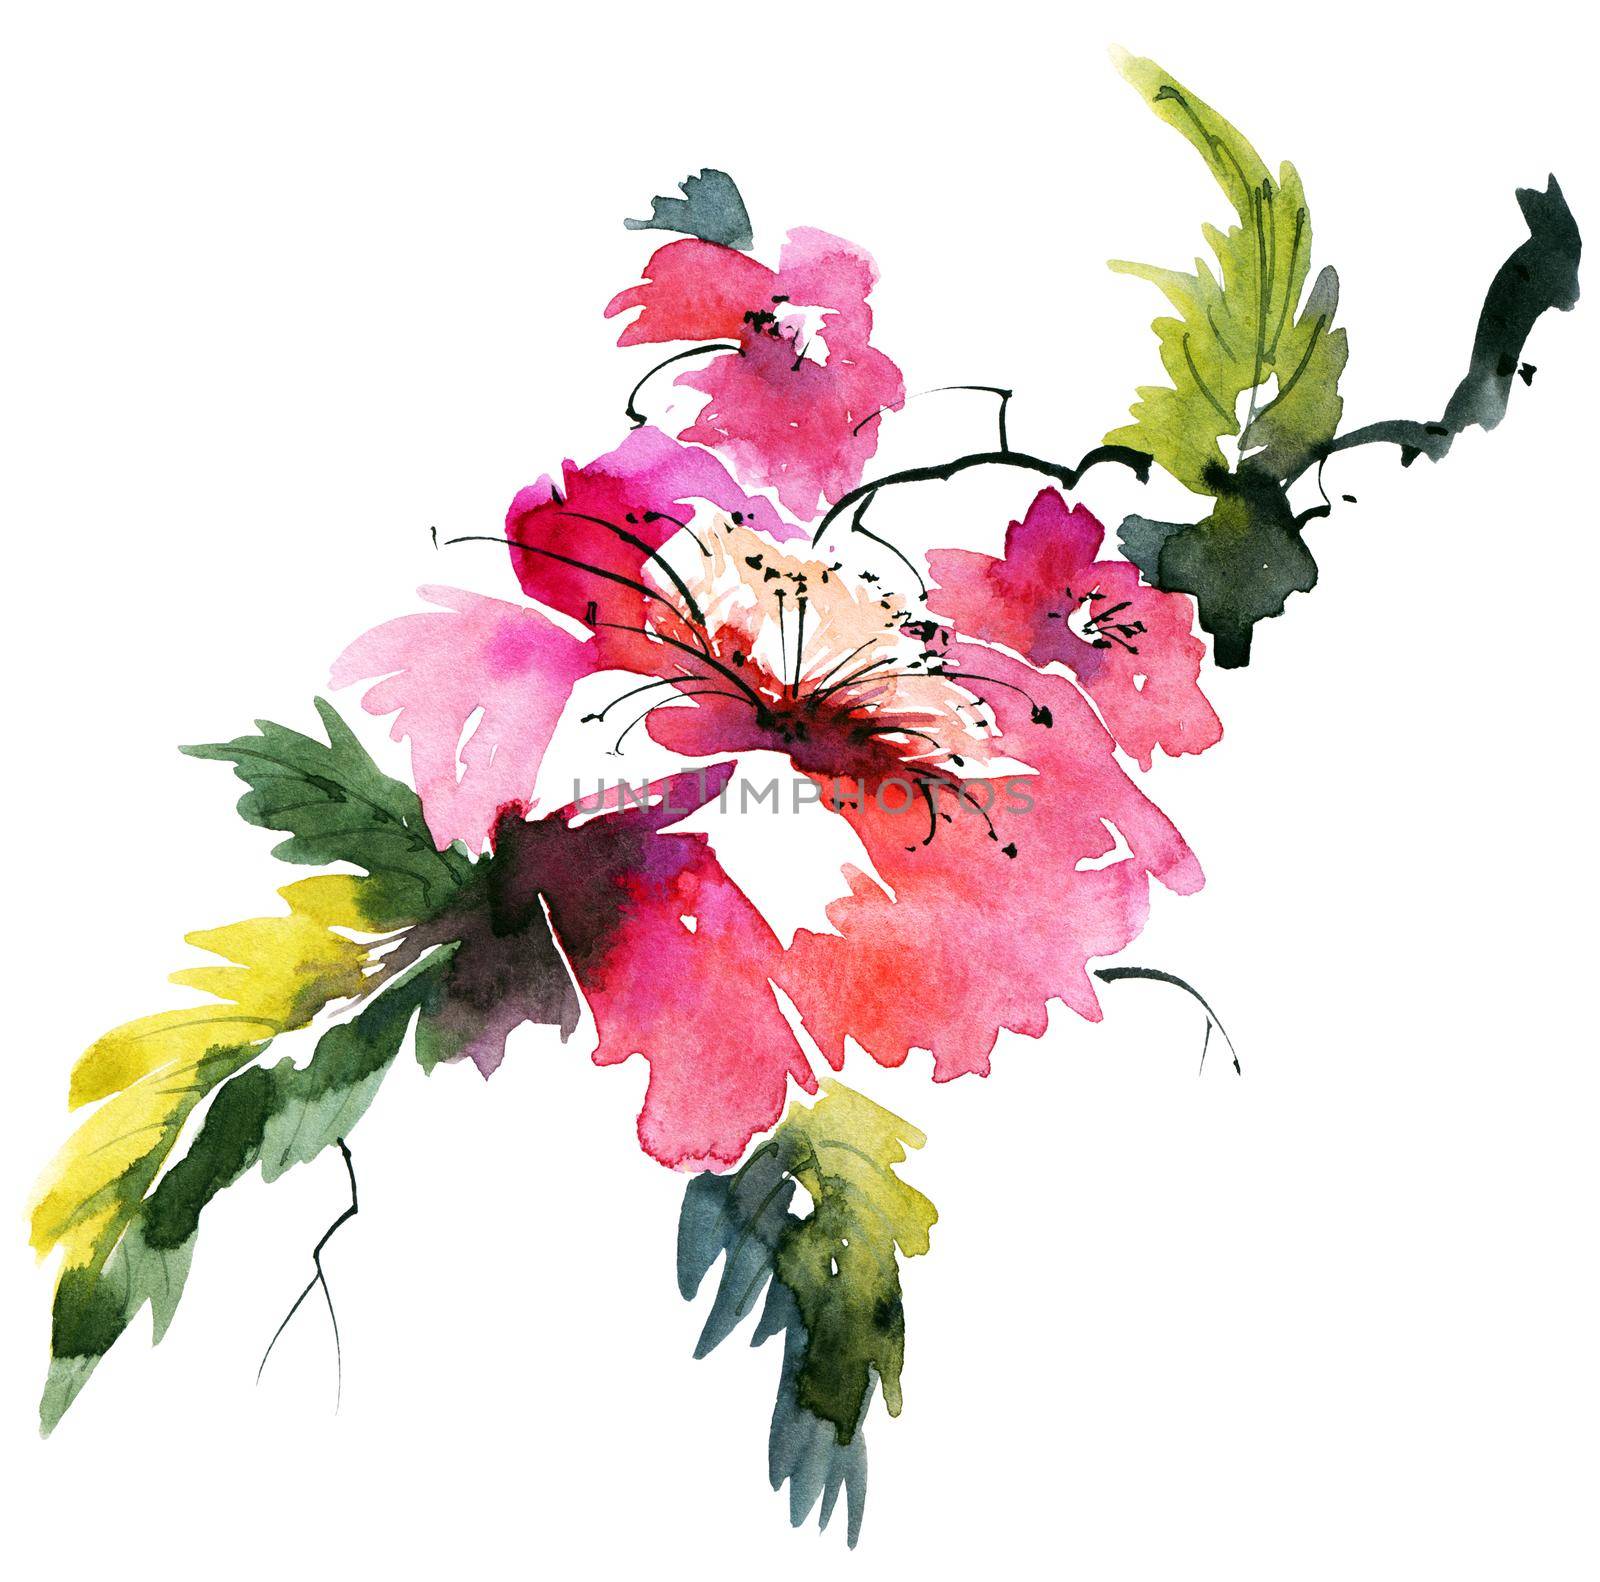 Watercolor hand-drawn branch with flowers and leaves on white background